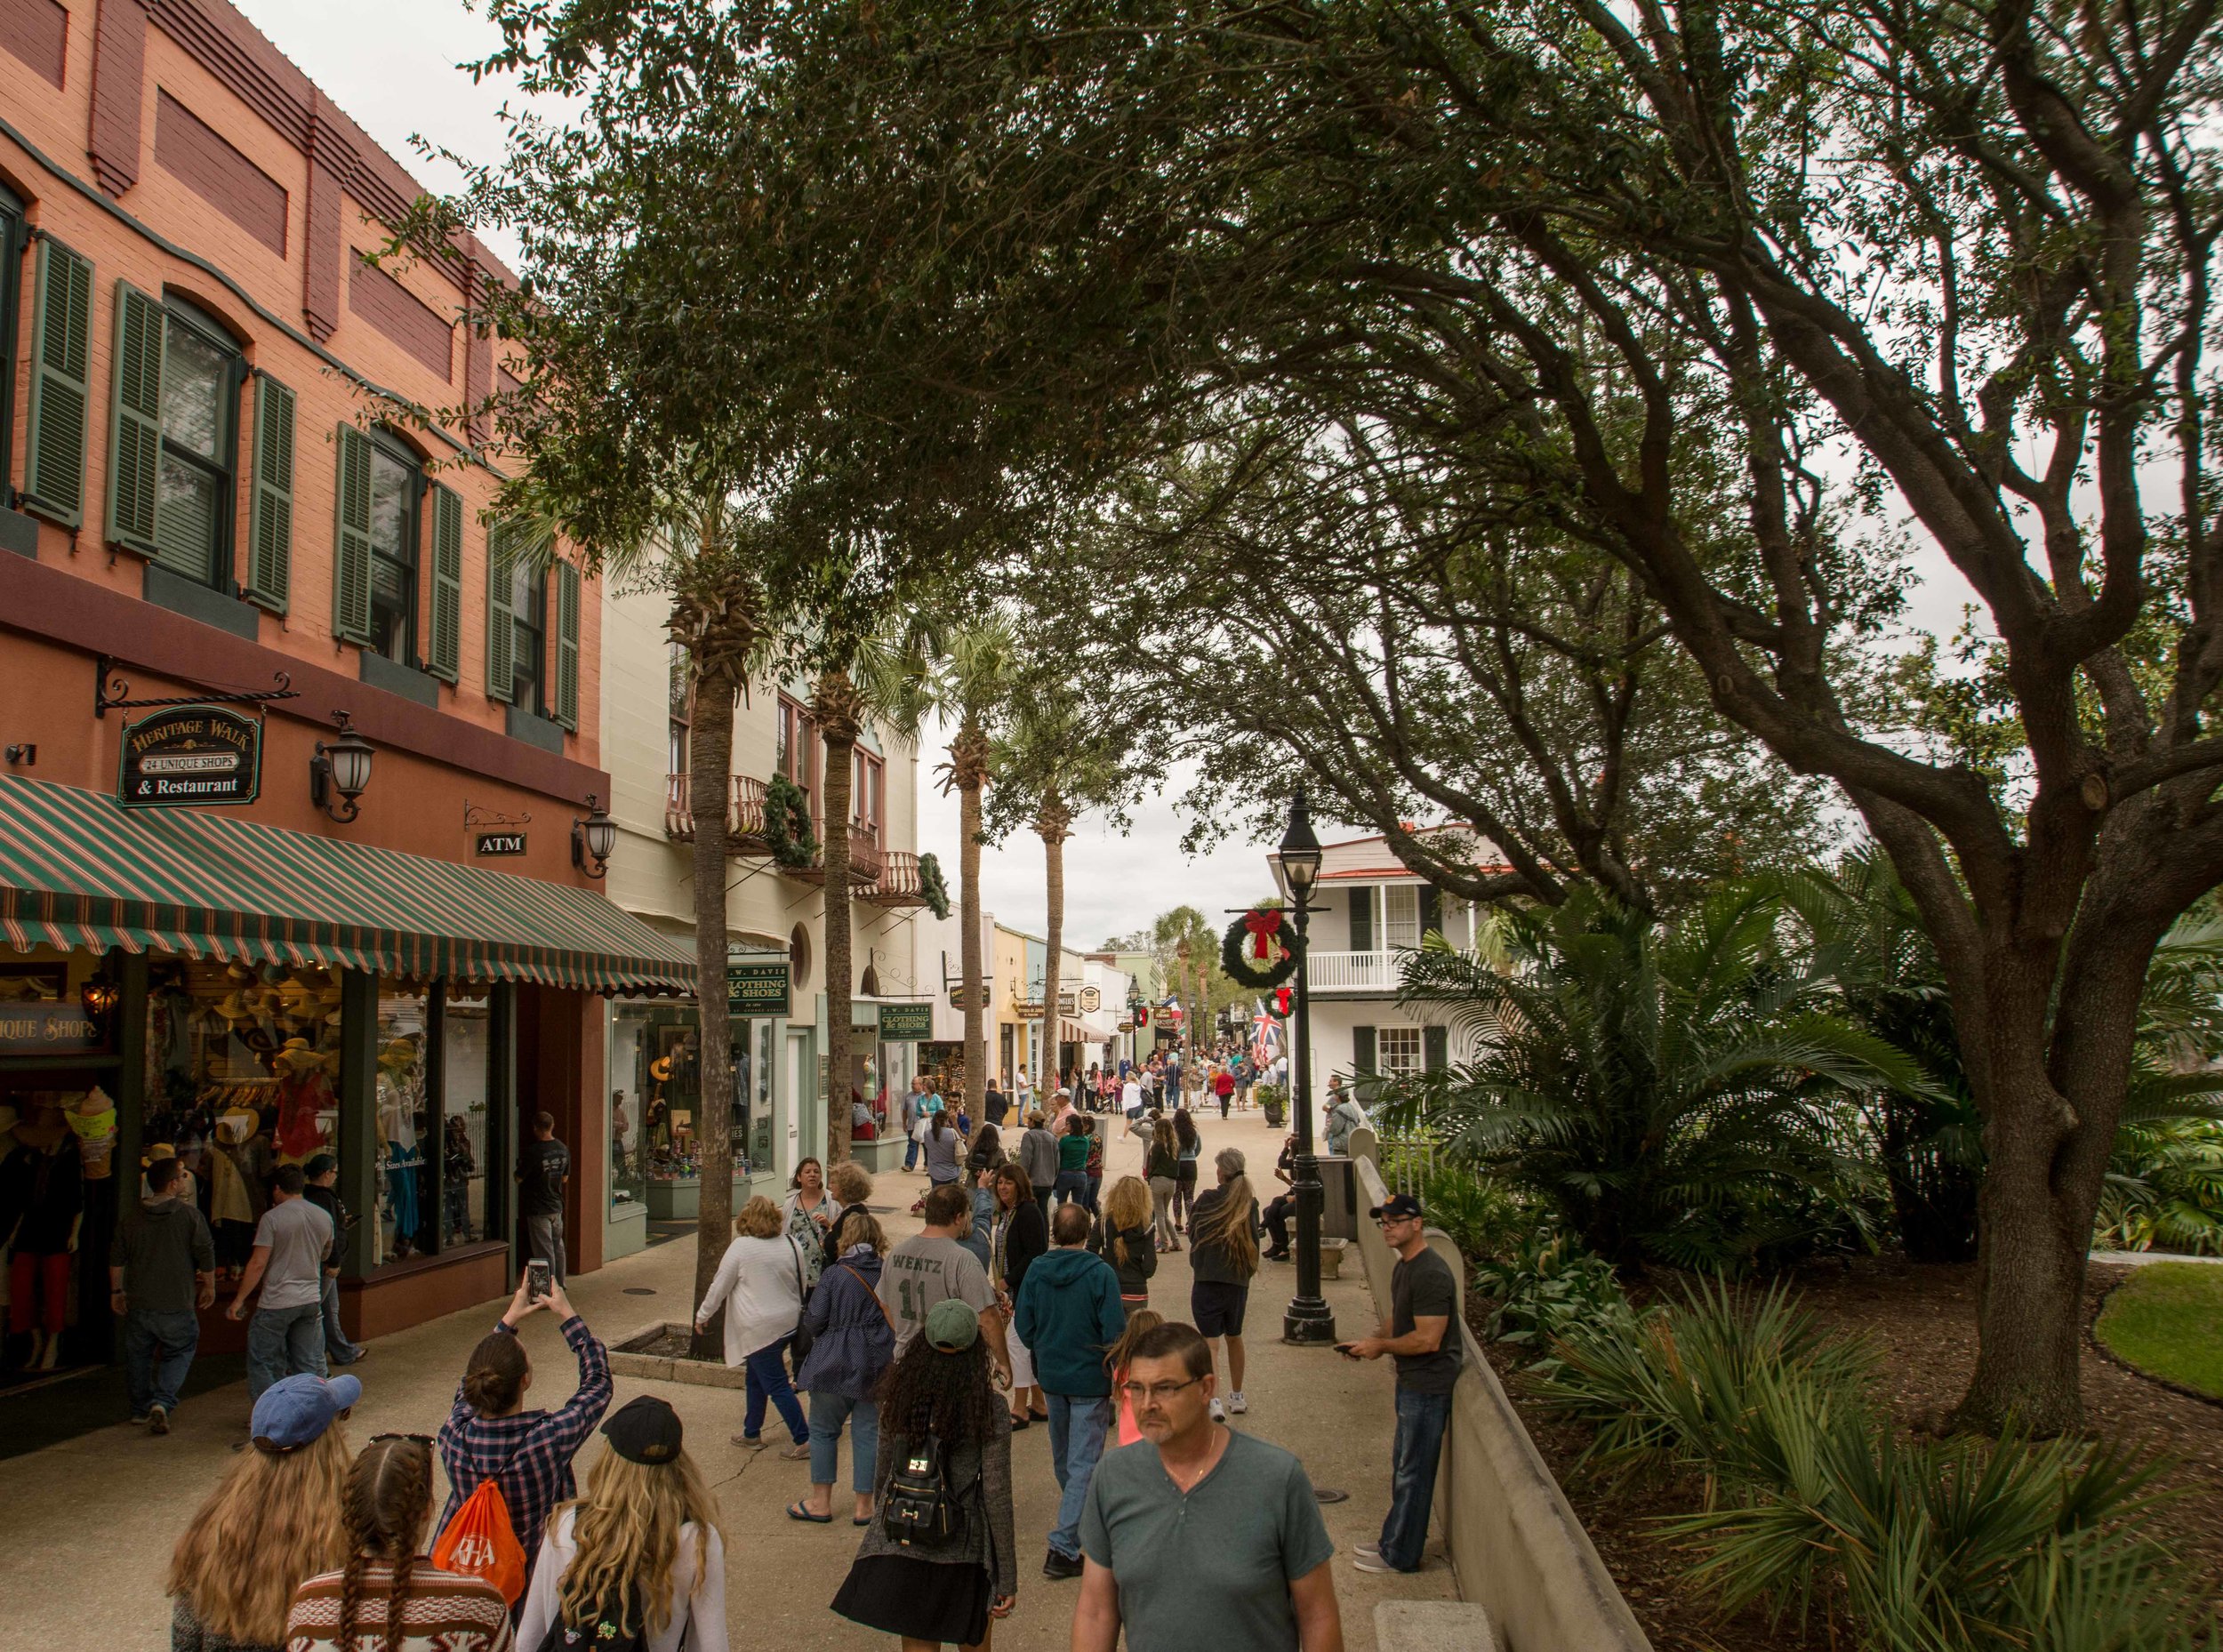  St. Augustine, the nation's oldest city, boasts a lively historic center that pre-dates the car by hundreds of years. People still can't seem to get enough of this pedestrian-oriented gem.&nbsp; 